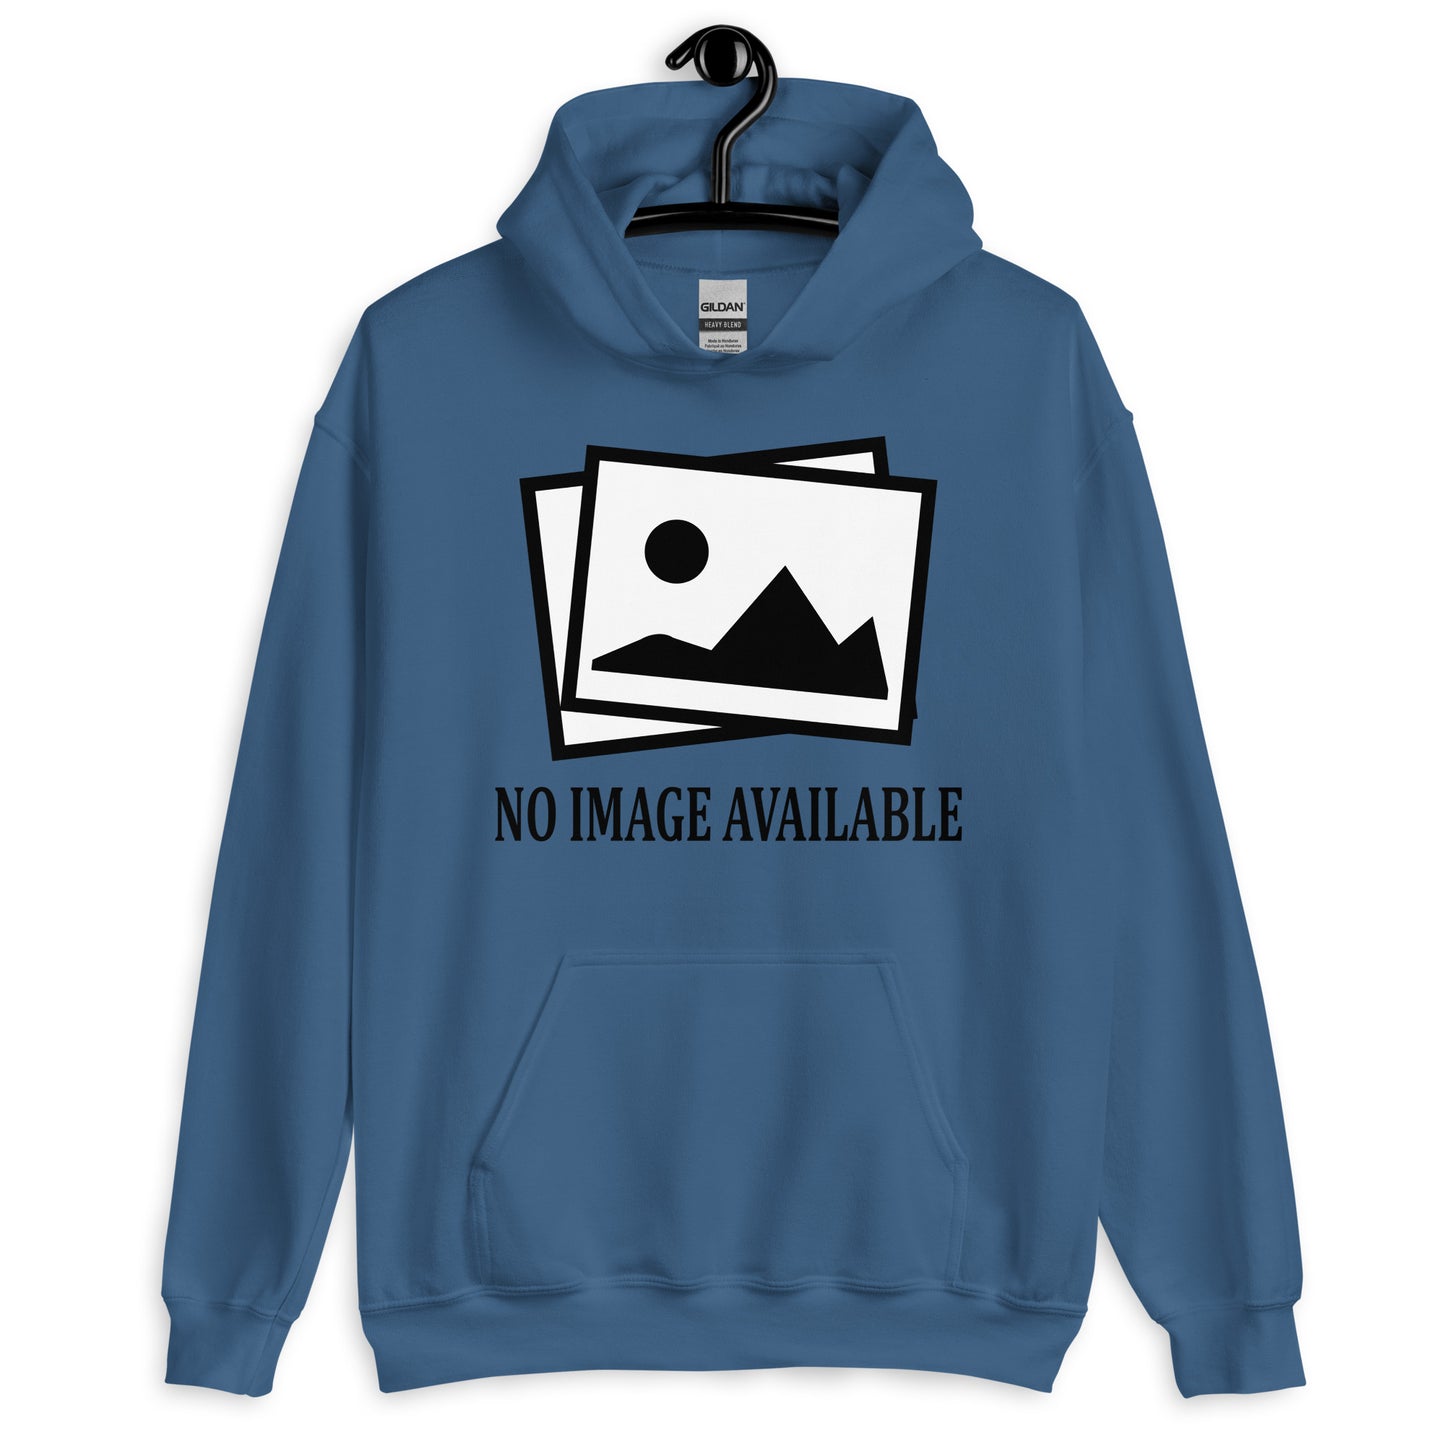 indigo blue hoodie with image and text "no image available"